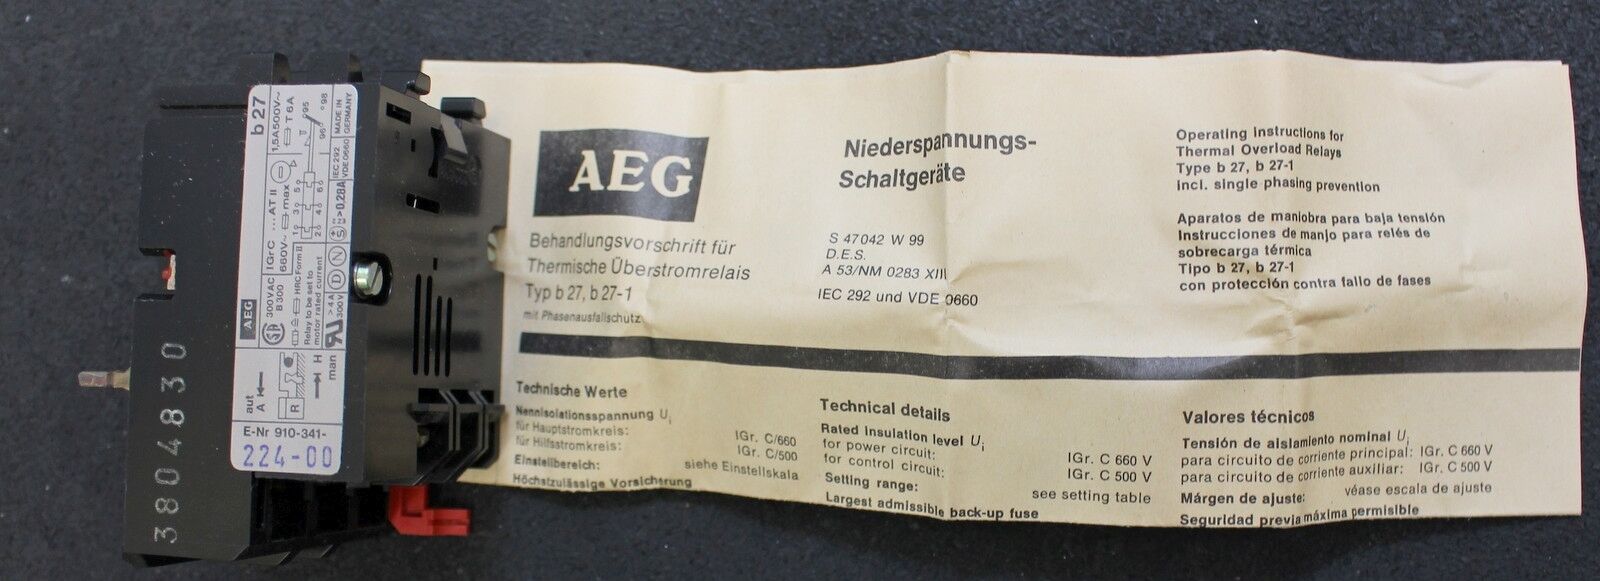 AEG Thermisches Überstromrelais b27 0,4-0,6A Thermal overload relay 910-341-224